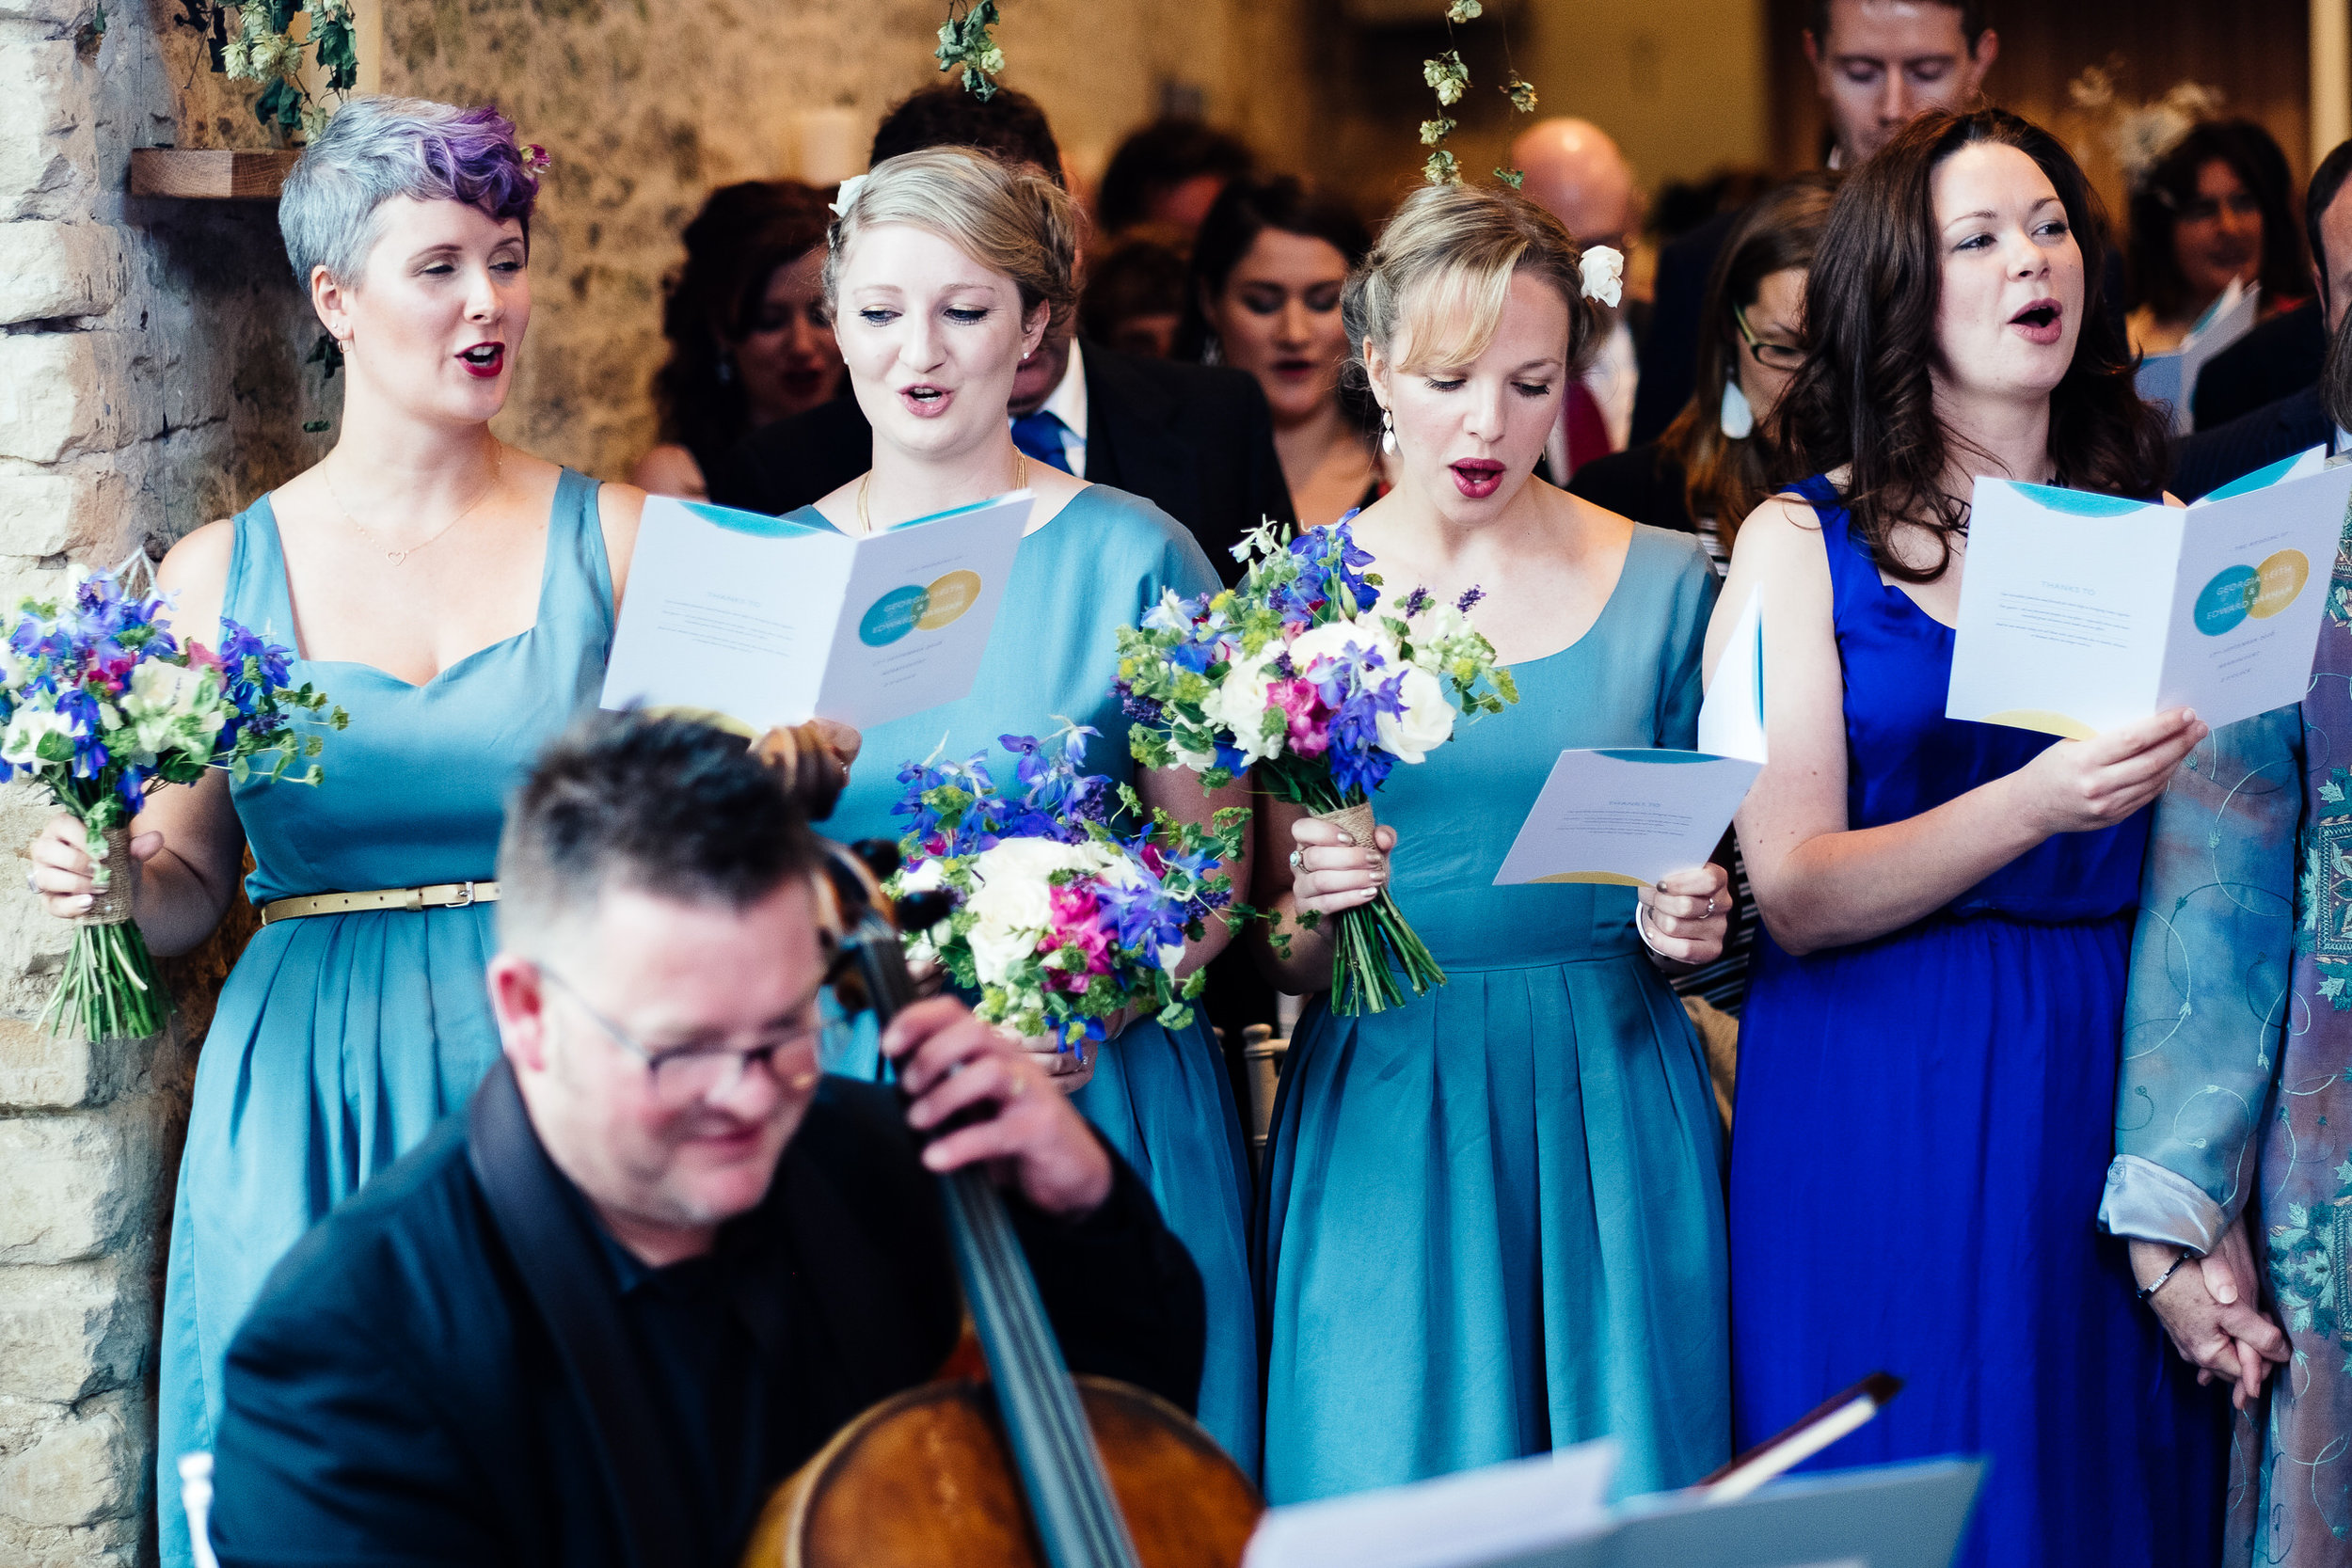 Guests singing at a wedding at Merriscourt Wedding Venue, Oxfordshire